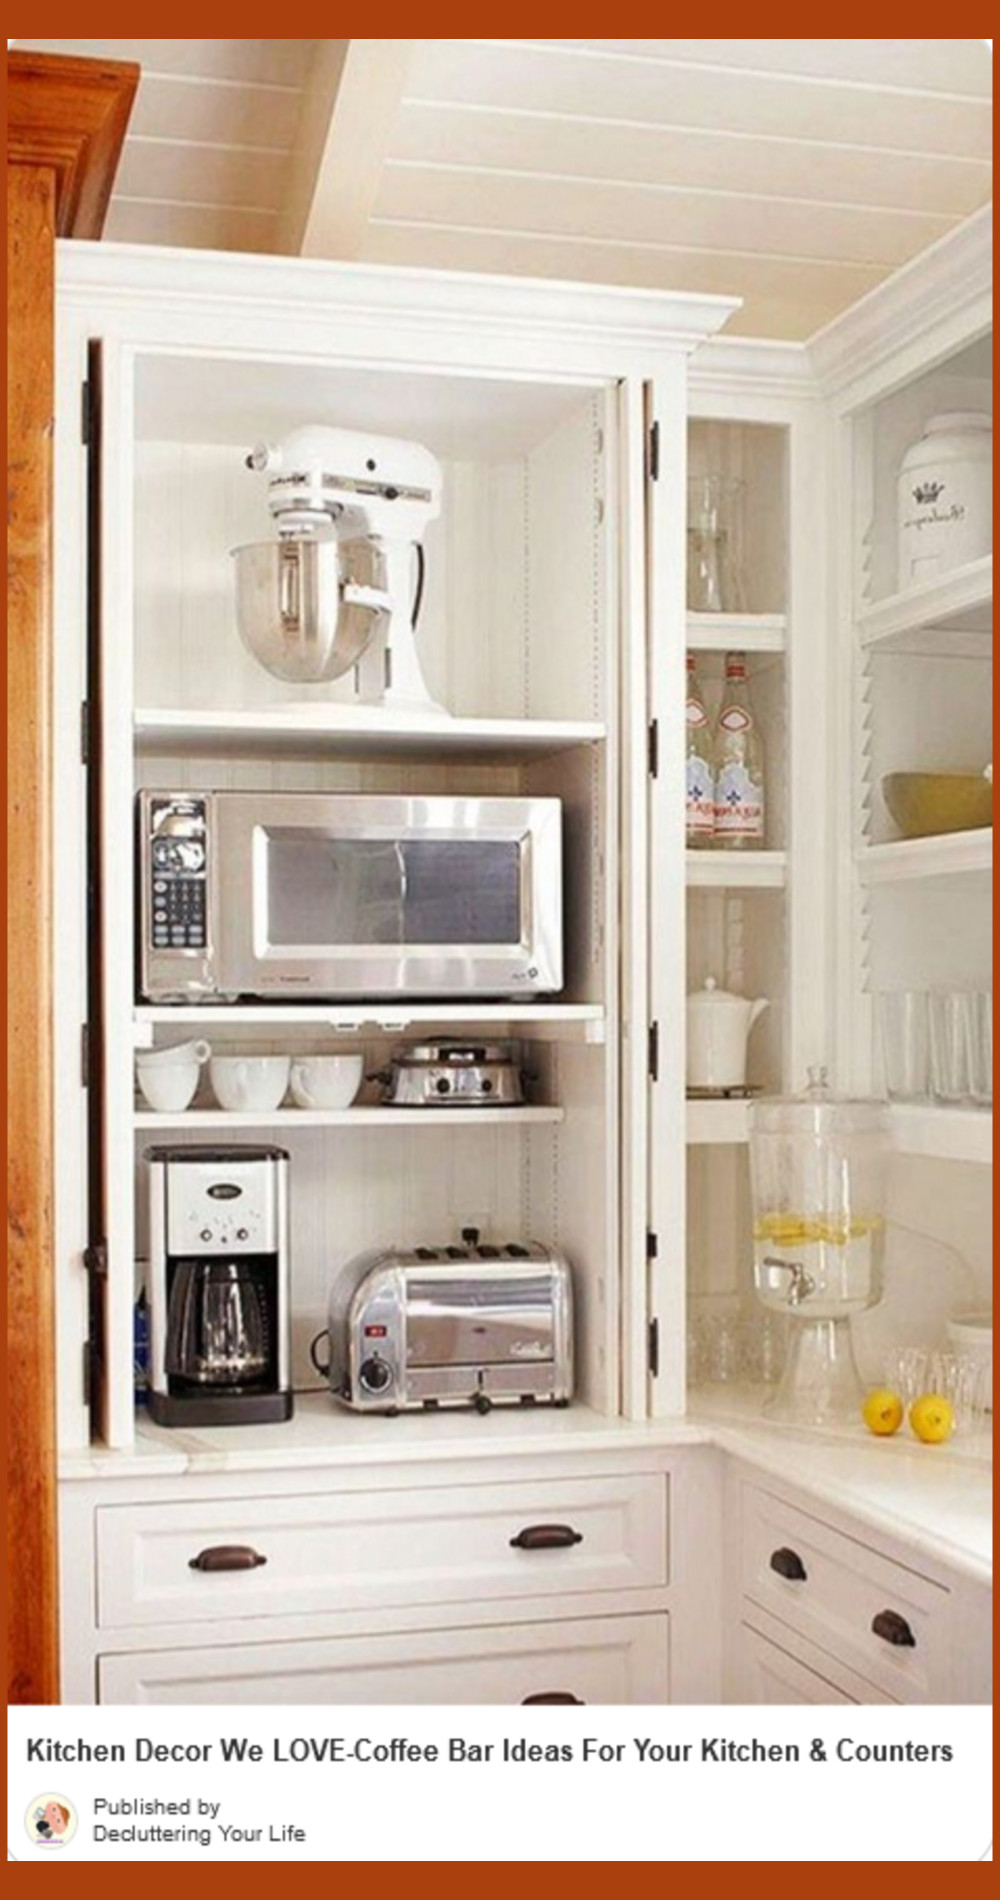 Appliance garage - small kitchen cabinet that hides small appliances